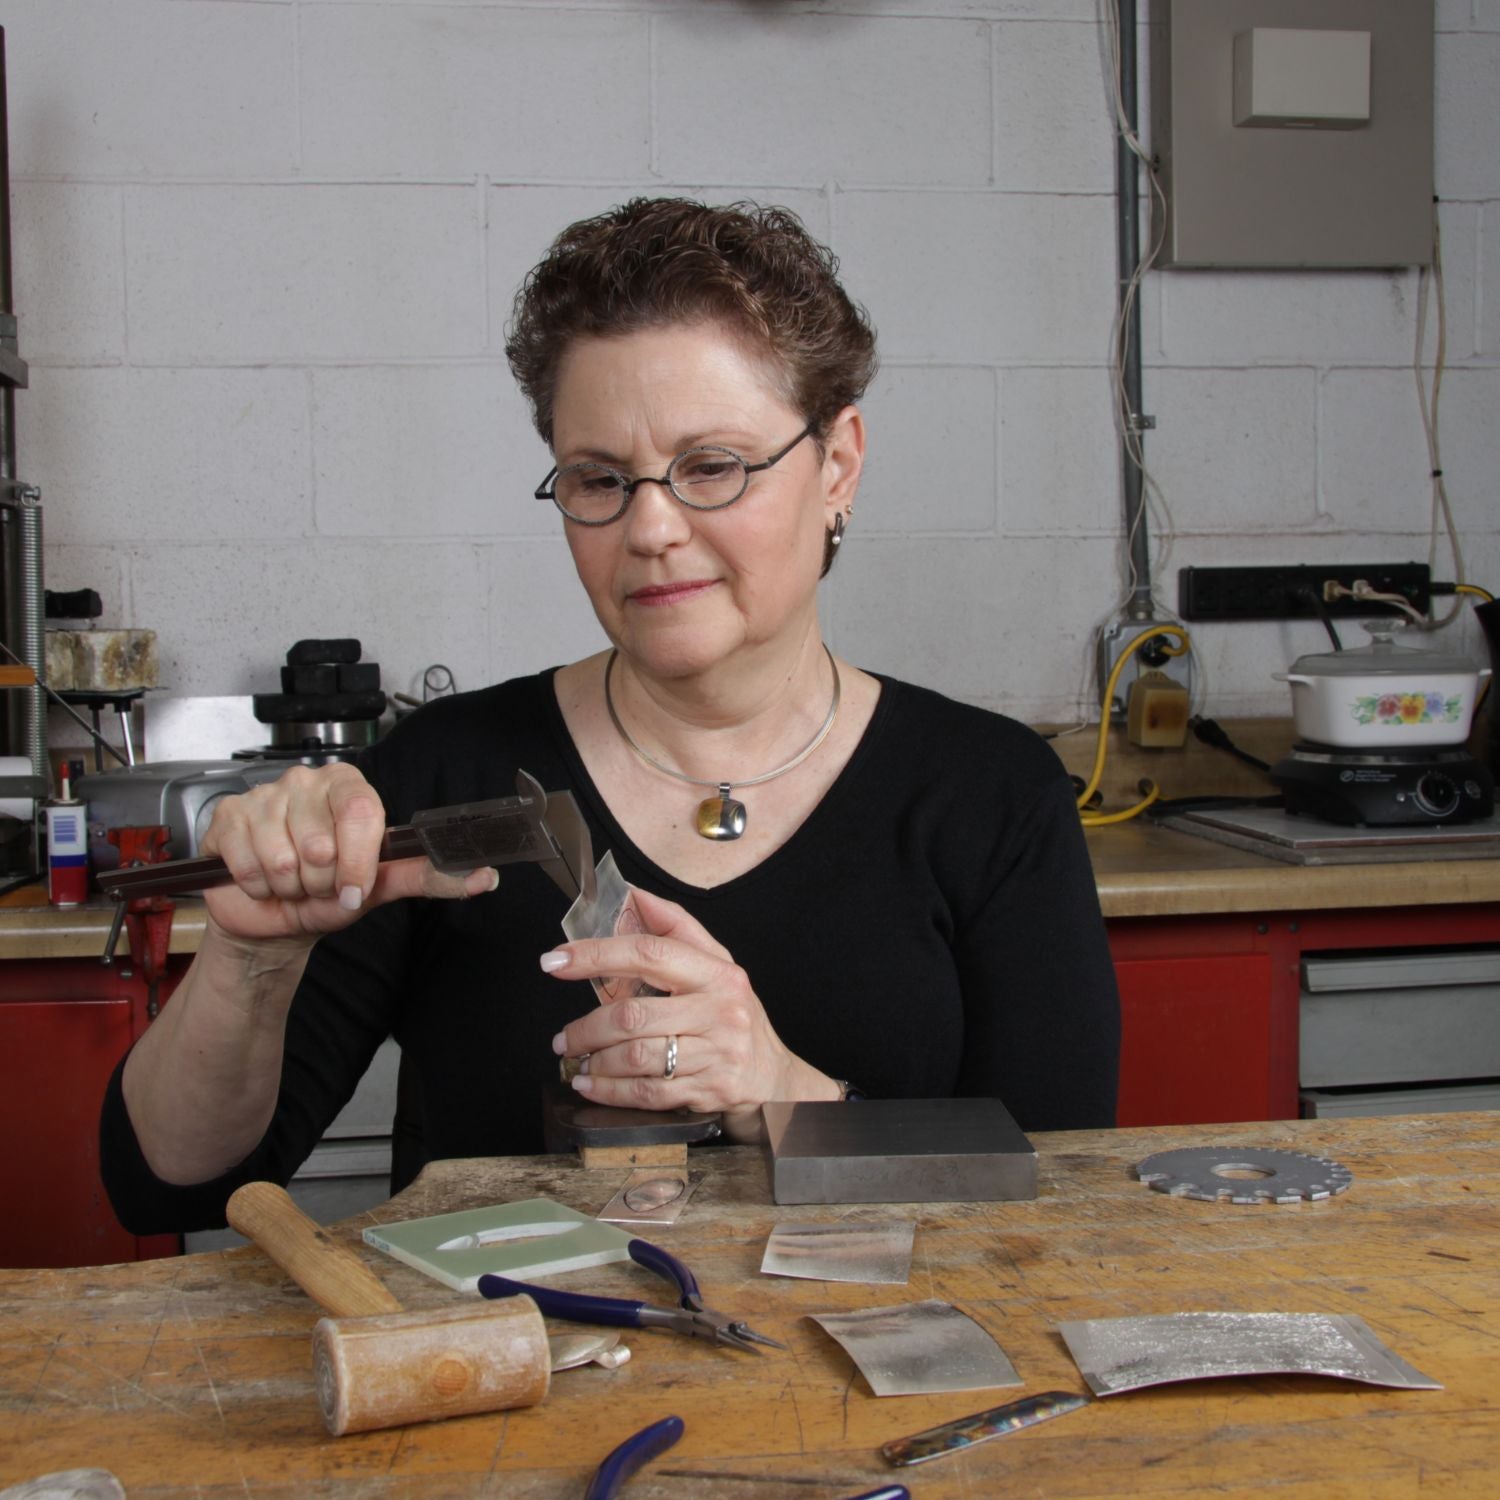 Estelle Vernon at her workbench, creating jewelry that embodies her design mantra of elegant simplicity.